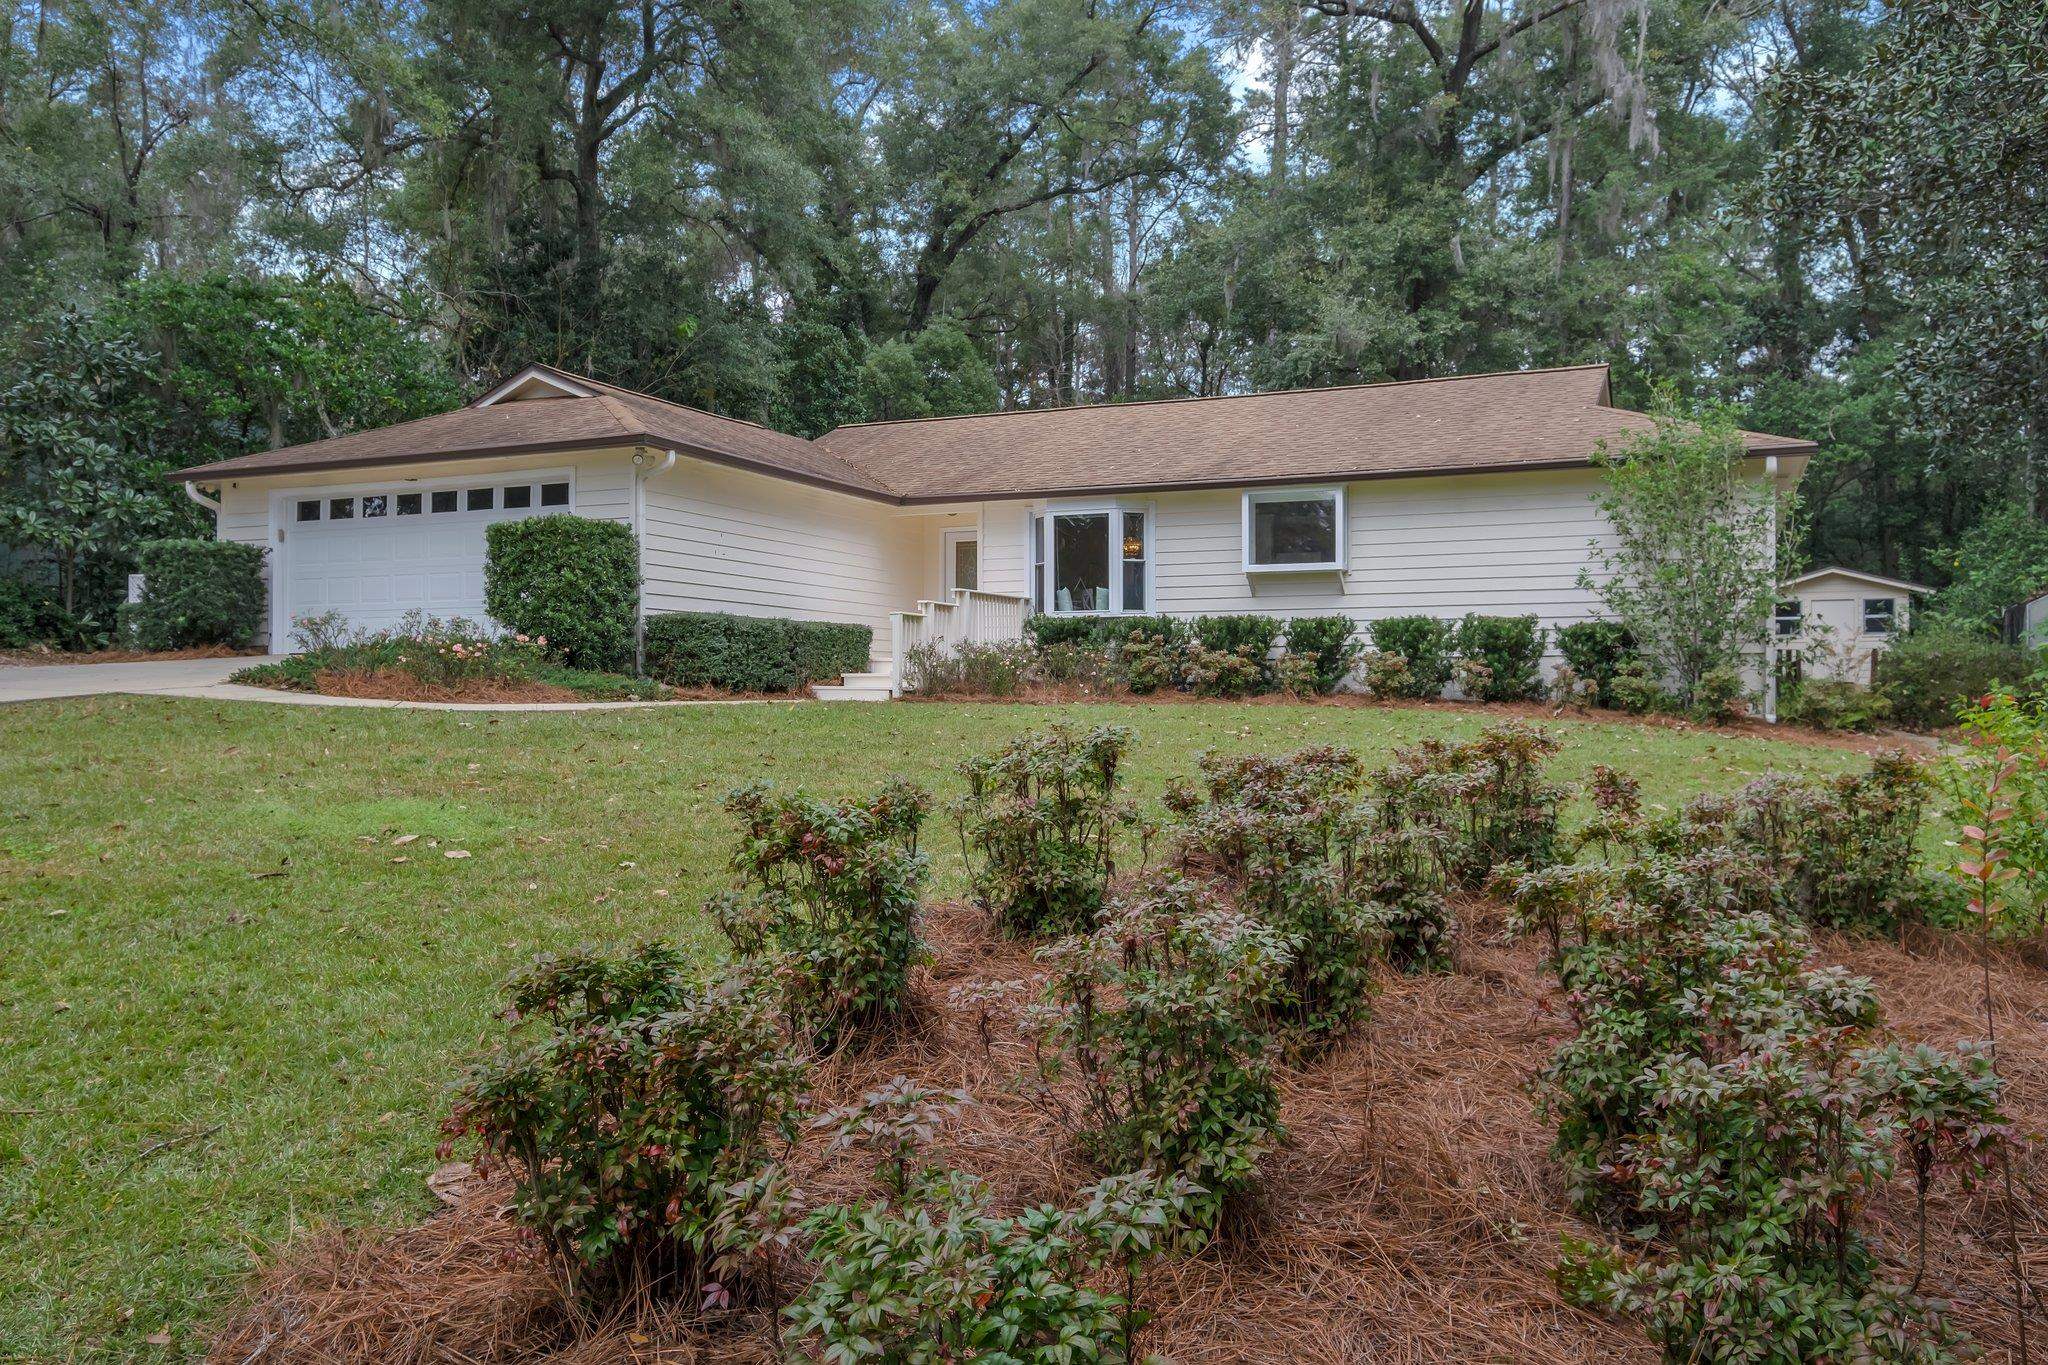 2656 Chumleigh Circle,TALLAHASSEE,Florida 32309,3 Bedrooms Bedrooms,2 BathroomsBathrooms,Detached single family,2656 Chumleigh Circle,366388